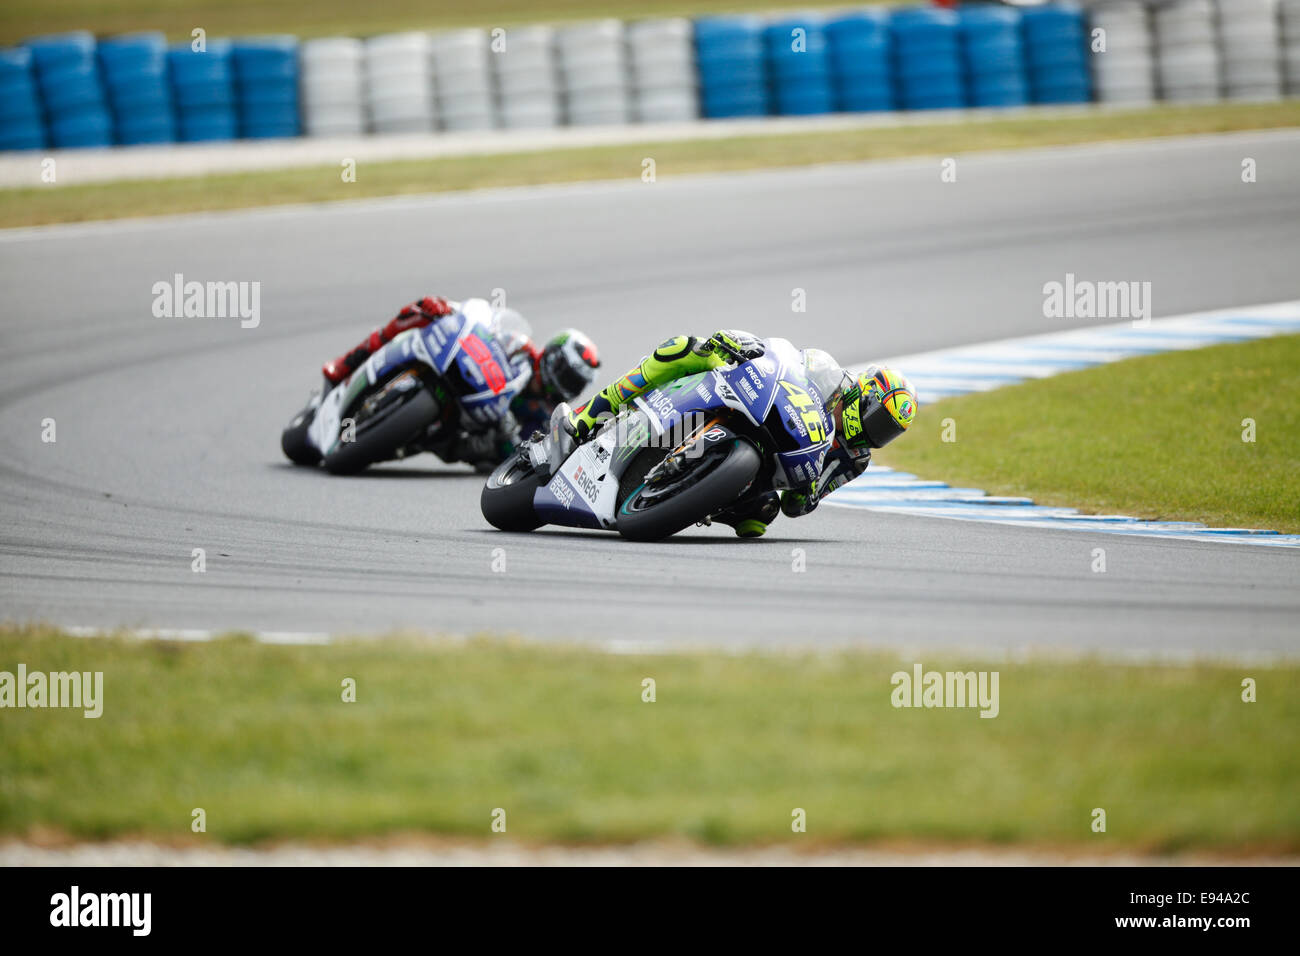 Phillip Island, Australia. 19th Oct, 2014. Valentino Rossi on bike number 46 on his way to vicory in the motoGP class after passing Jorge Lorenzo on bike 99 at 2014 Tissot Australian Motorcycle Grand Prix Credit:  Jandrie Lombard/Alamy Live News Stock Photo